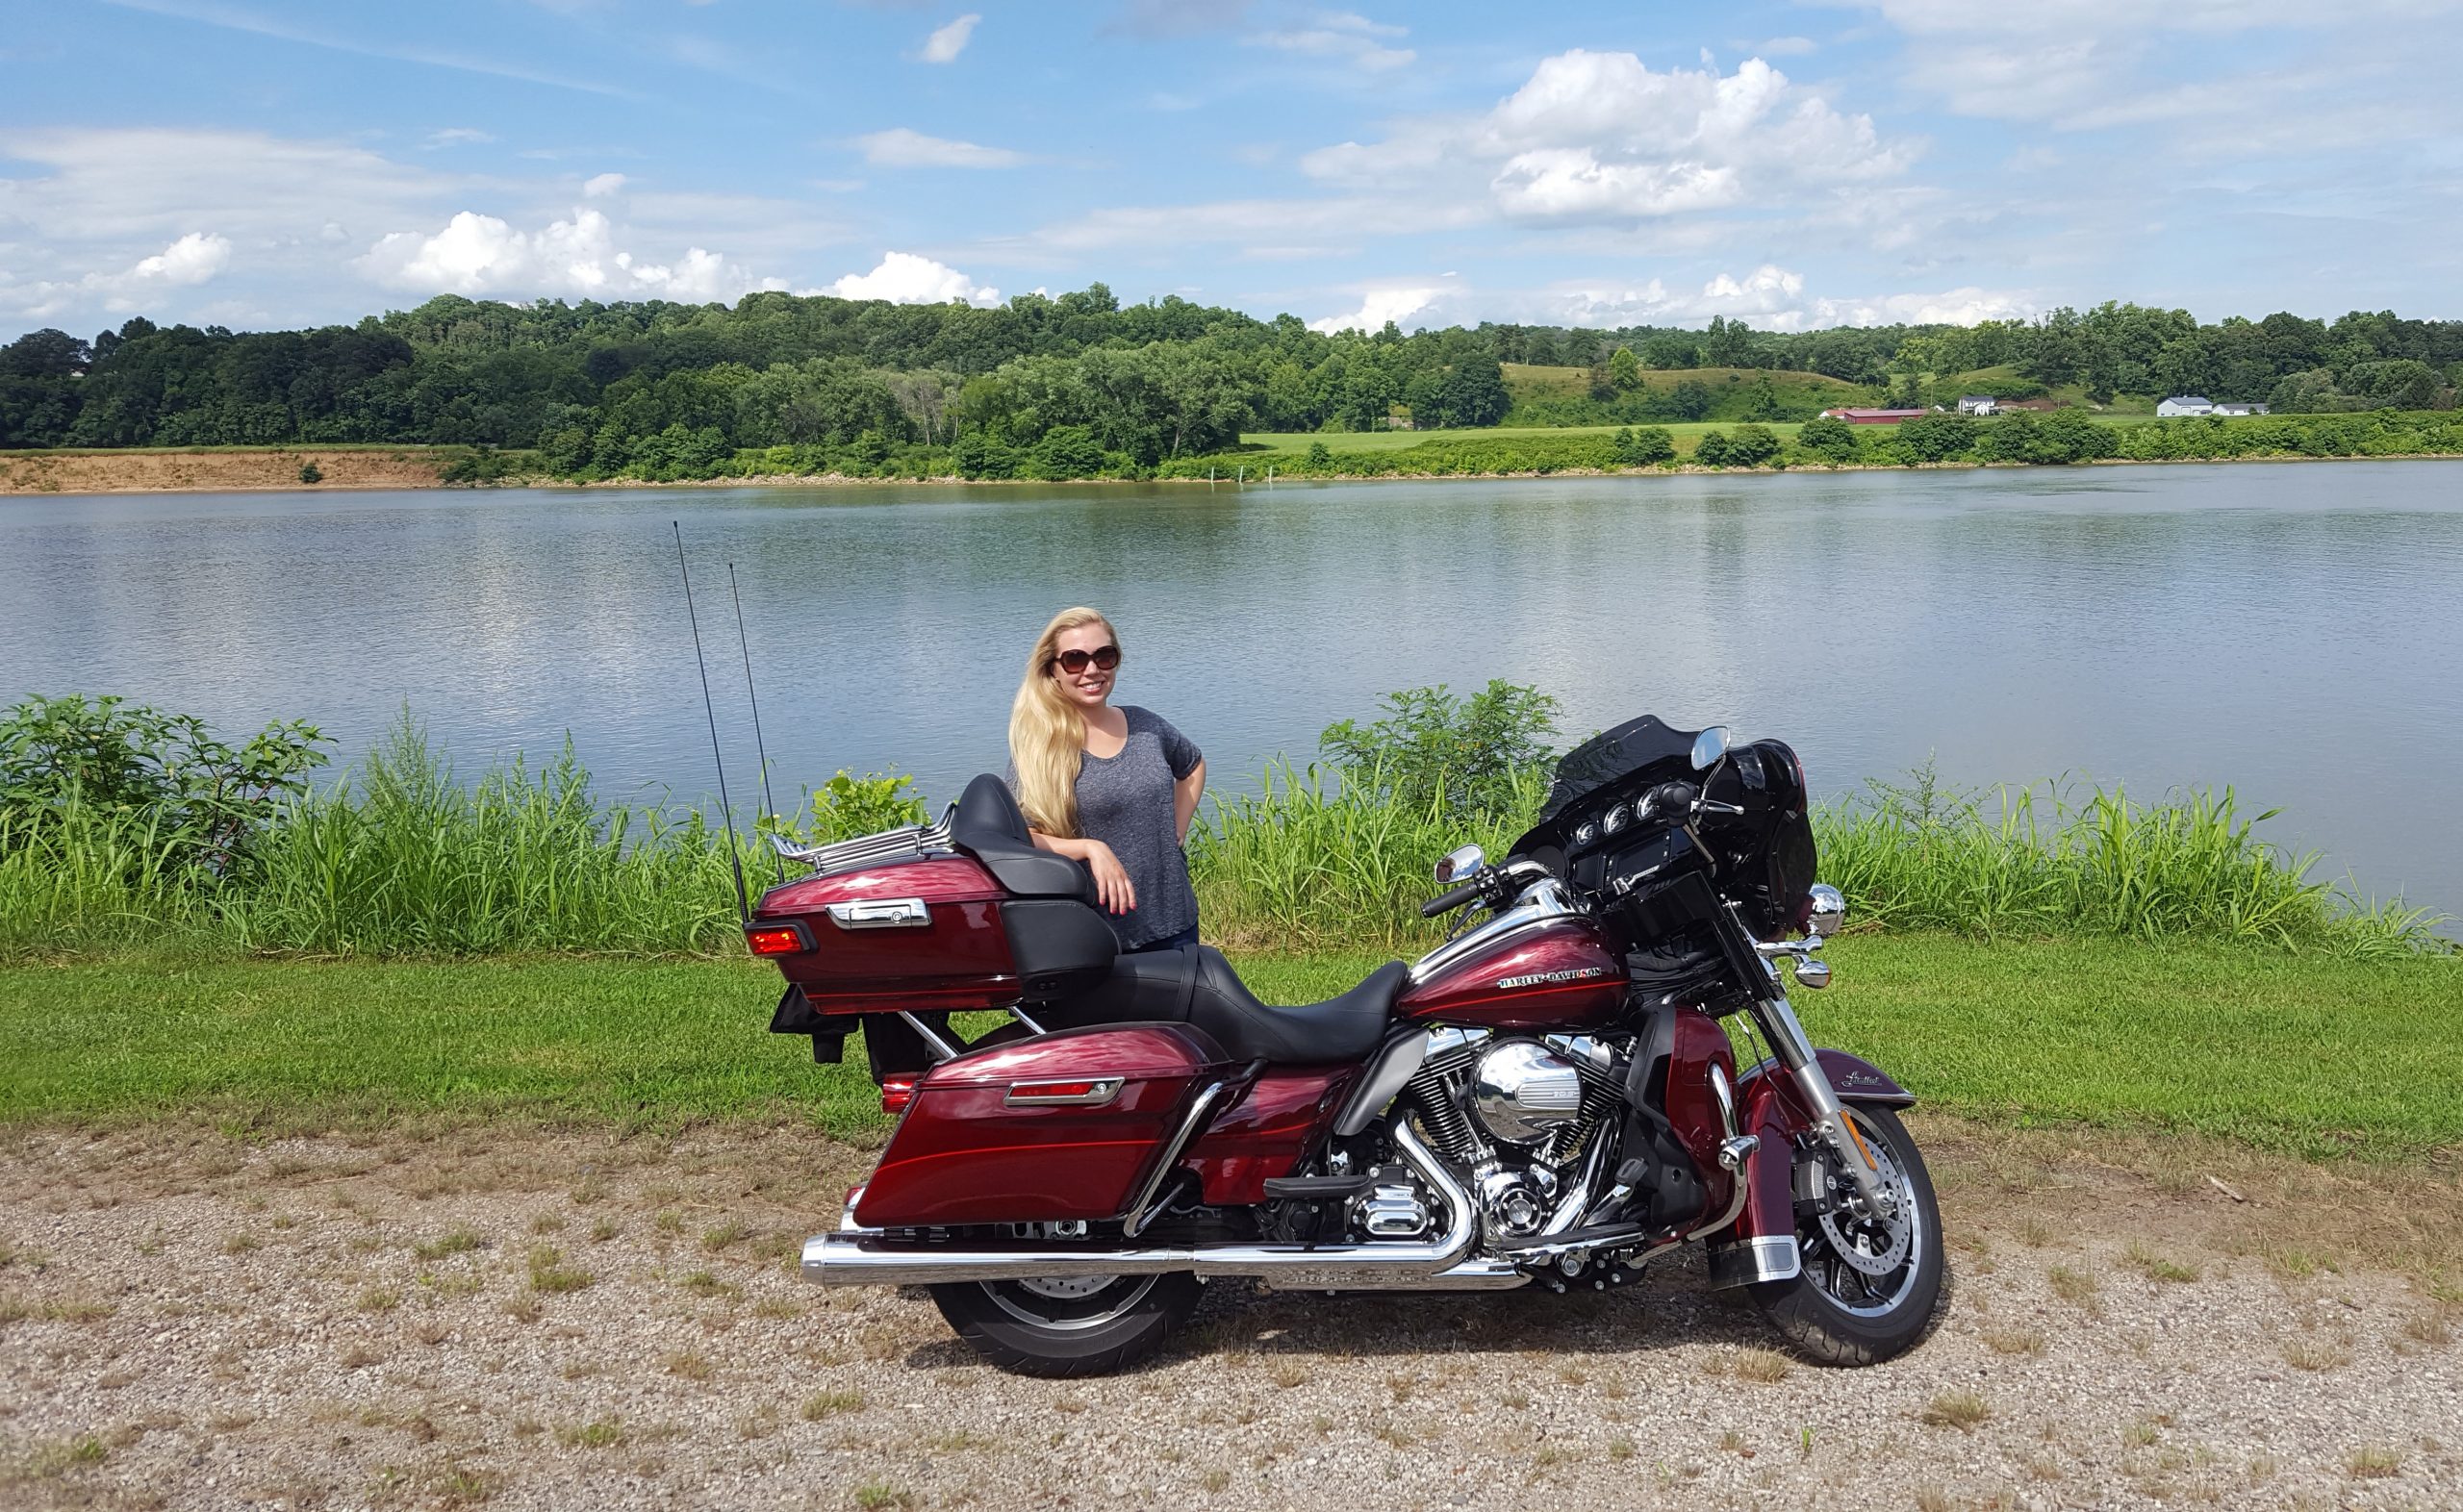 Best Motorcycle Rides in Ohio: The Scenic Windy 9